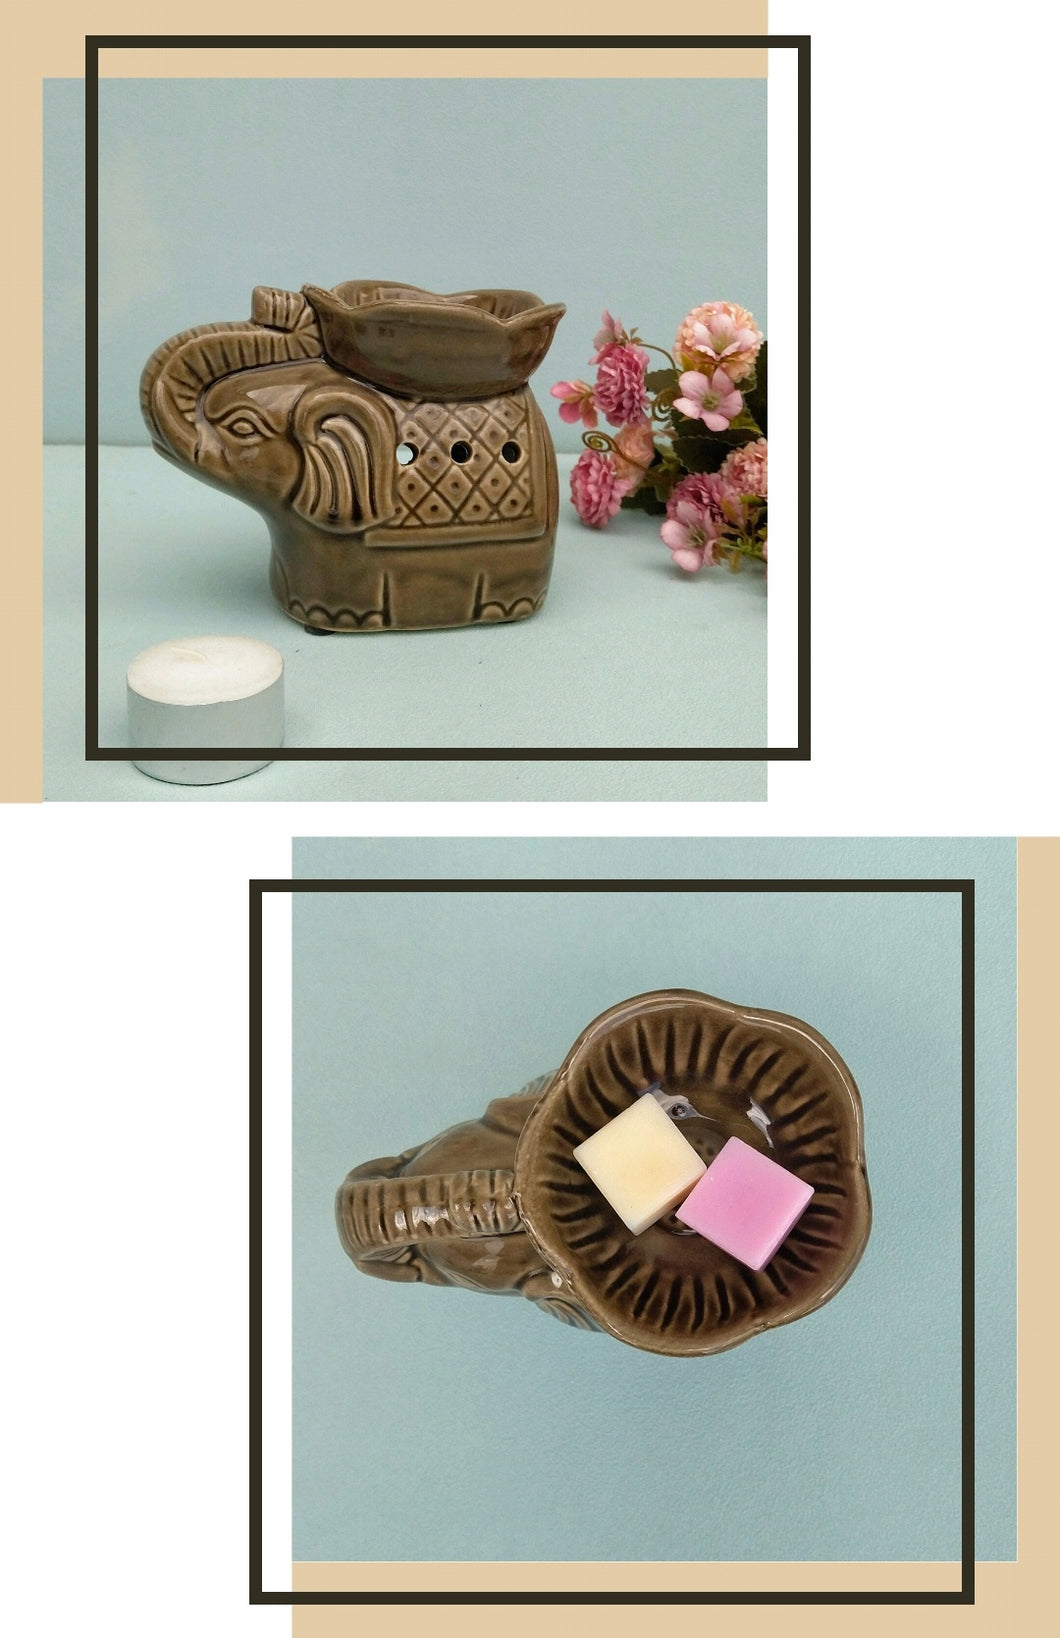 Ceramic Elephant Oil Diffuser, Wax Melter Gift Set With Soy Wax Melts